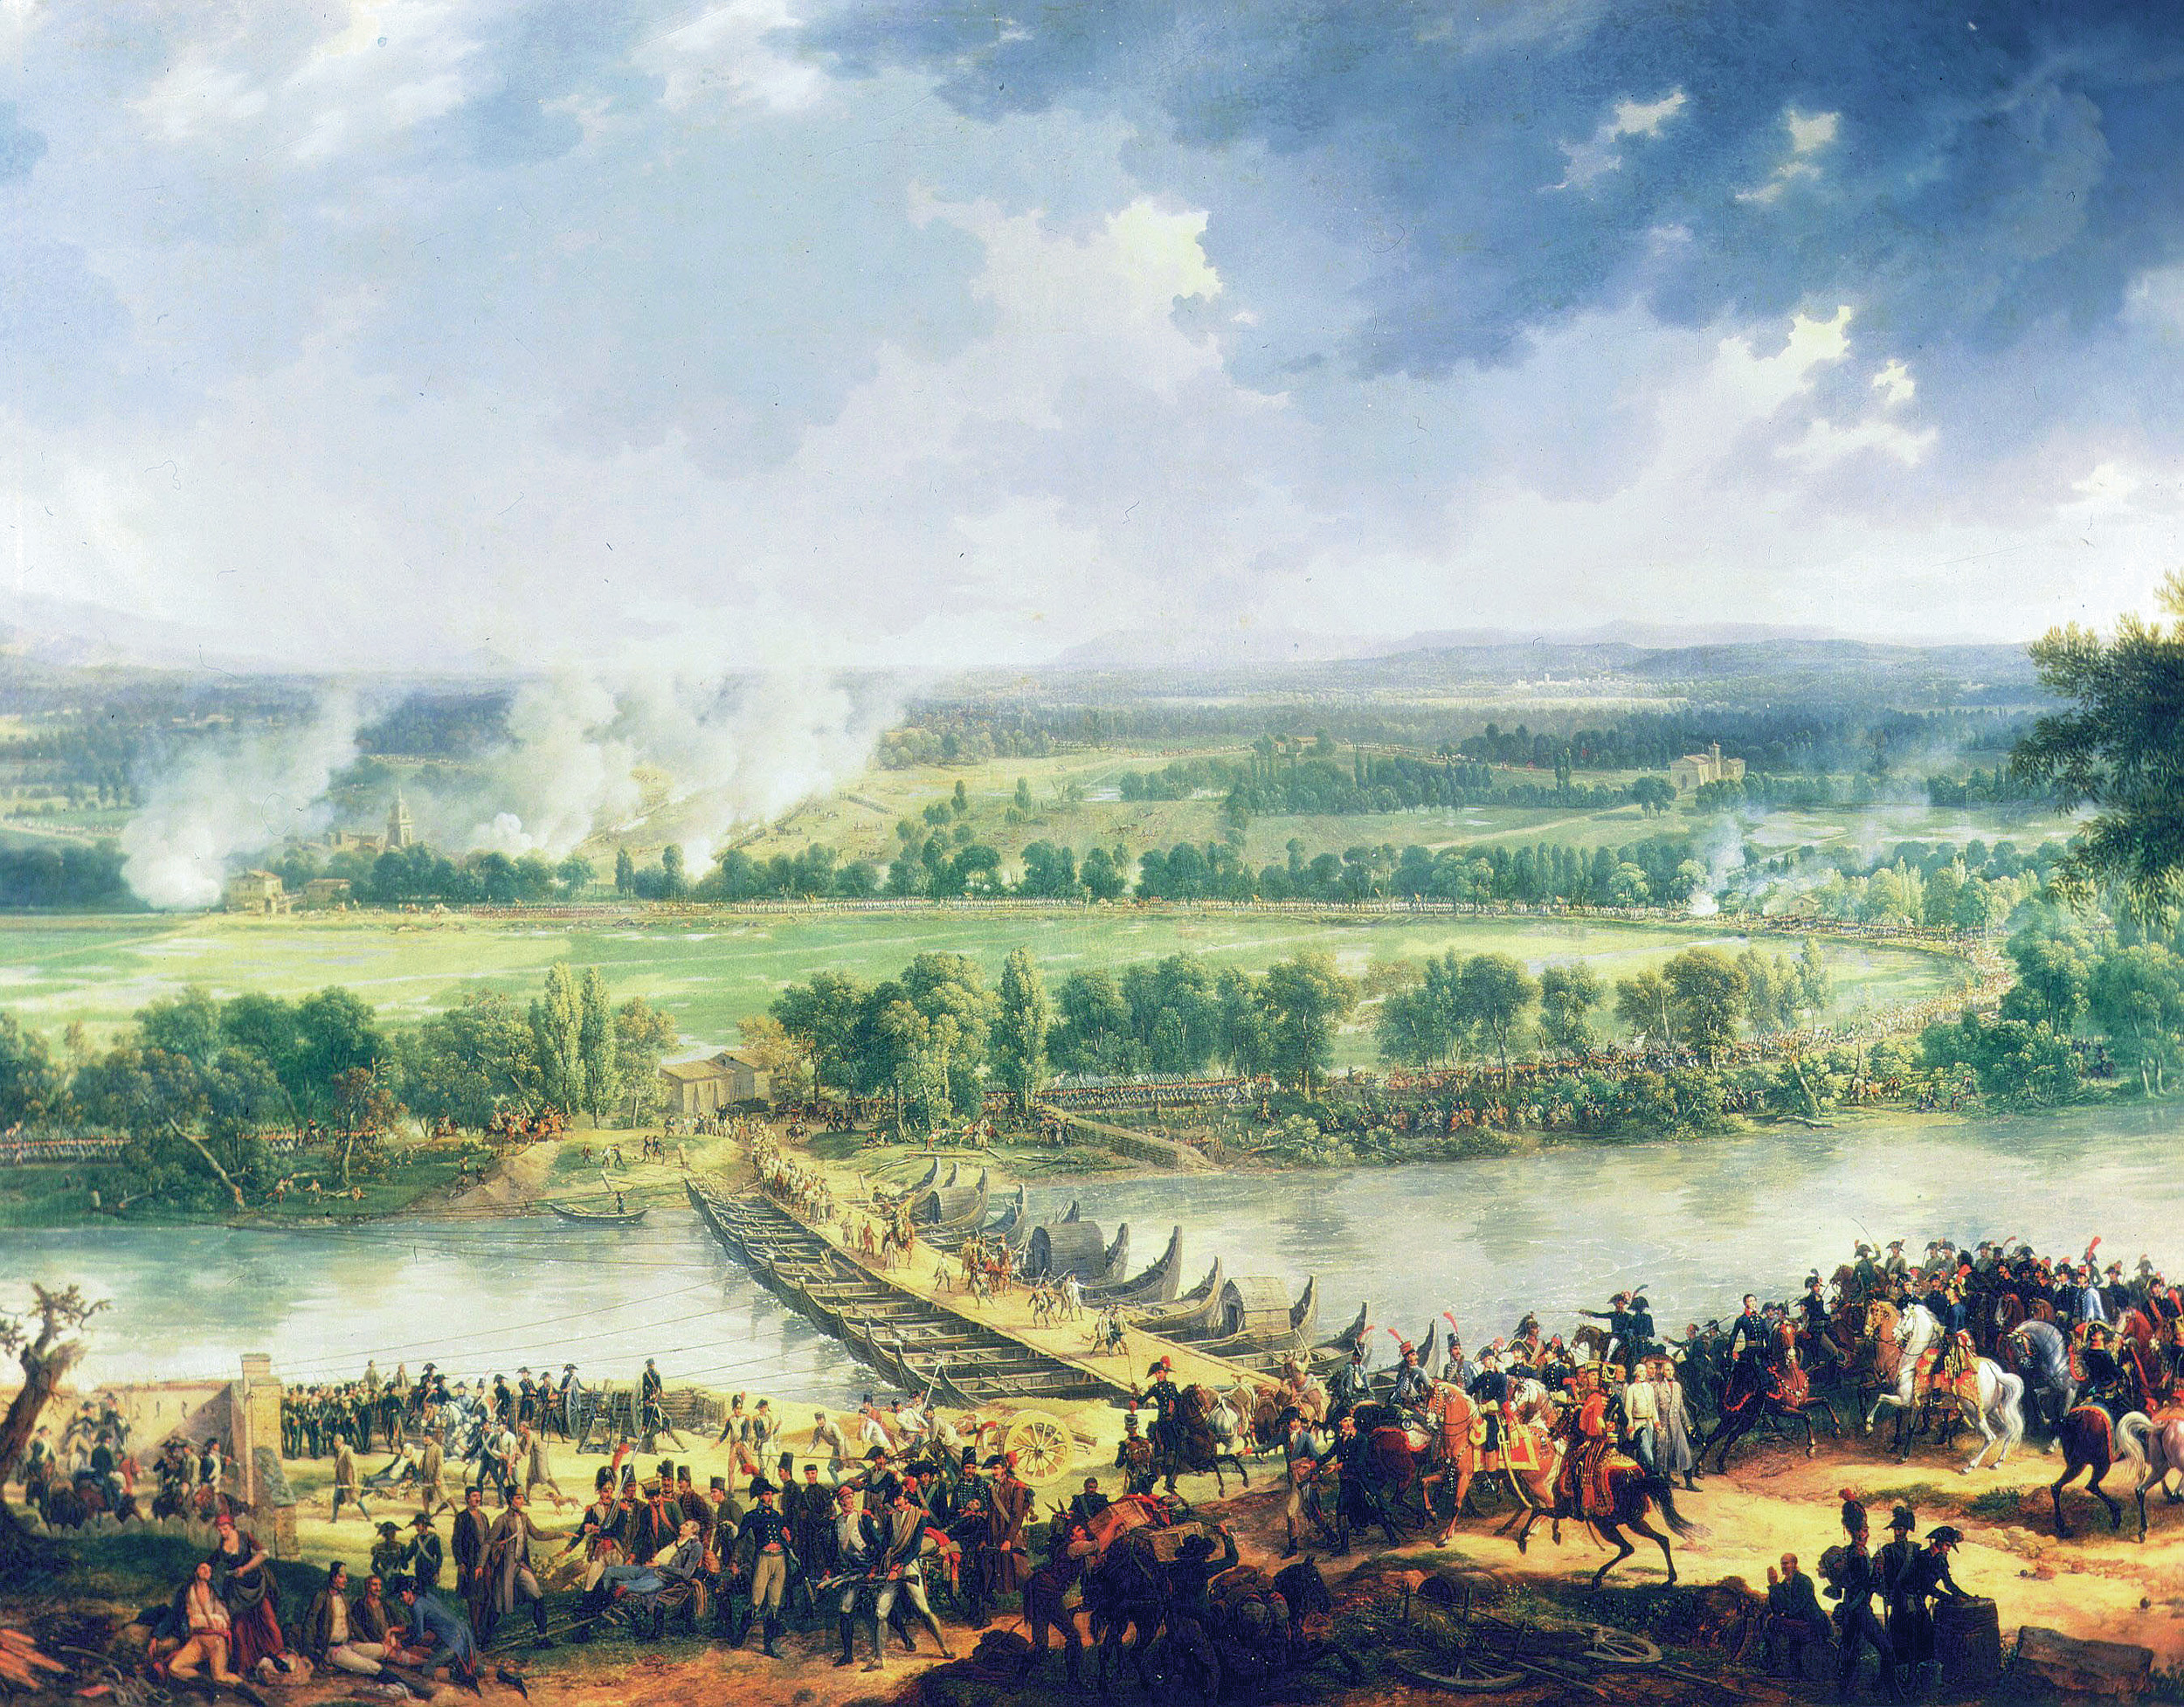 The French were held up by Croatians at the Battle of Arcola Bridge in November 1796. Bonaparte personally led another charge here to force the crossing.